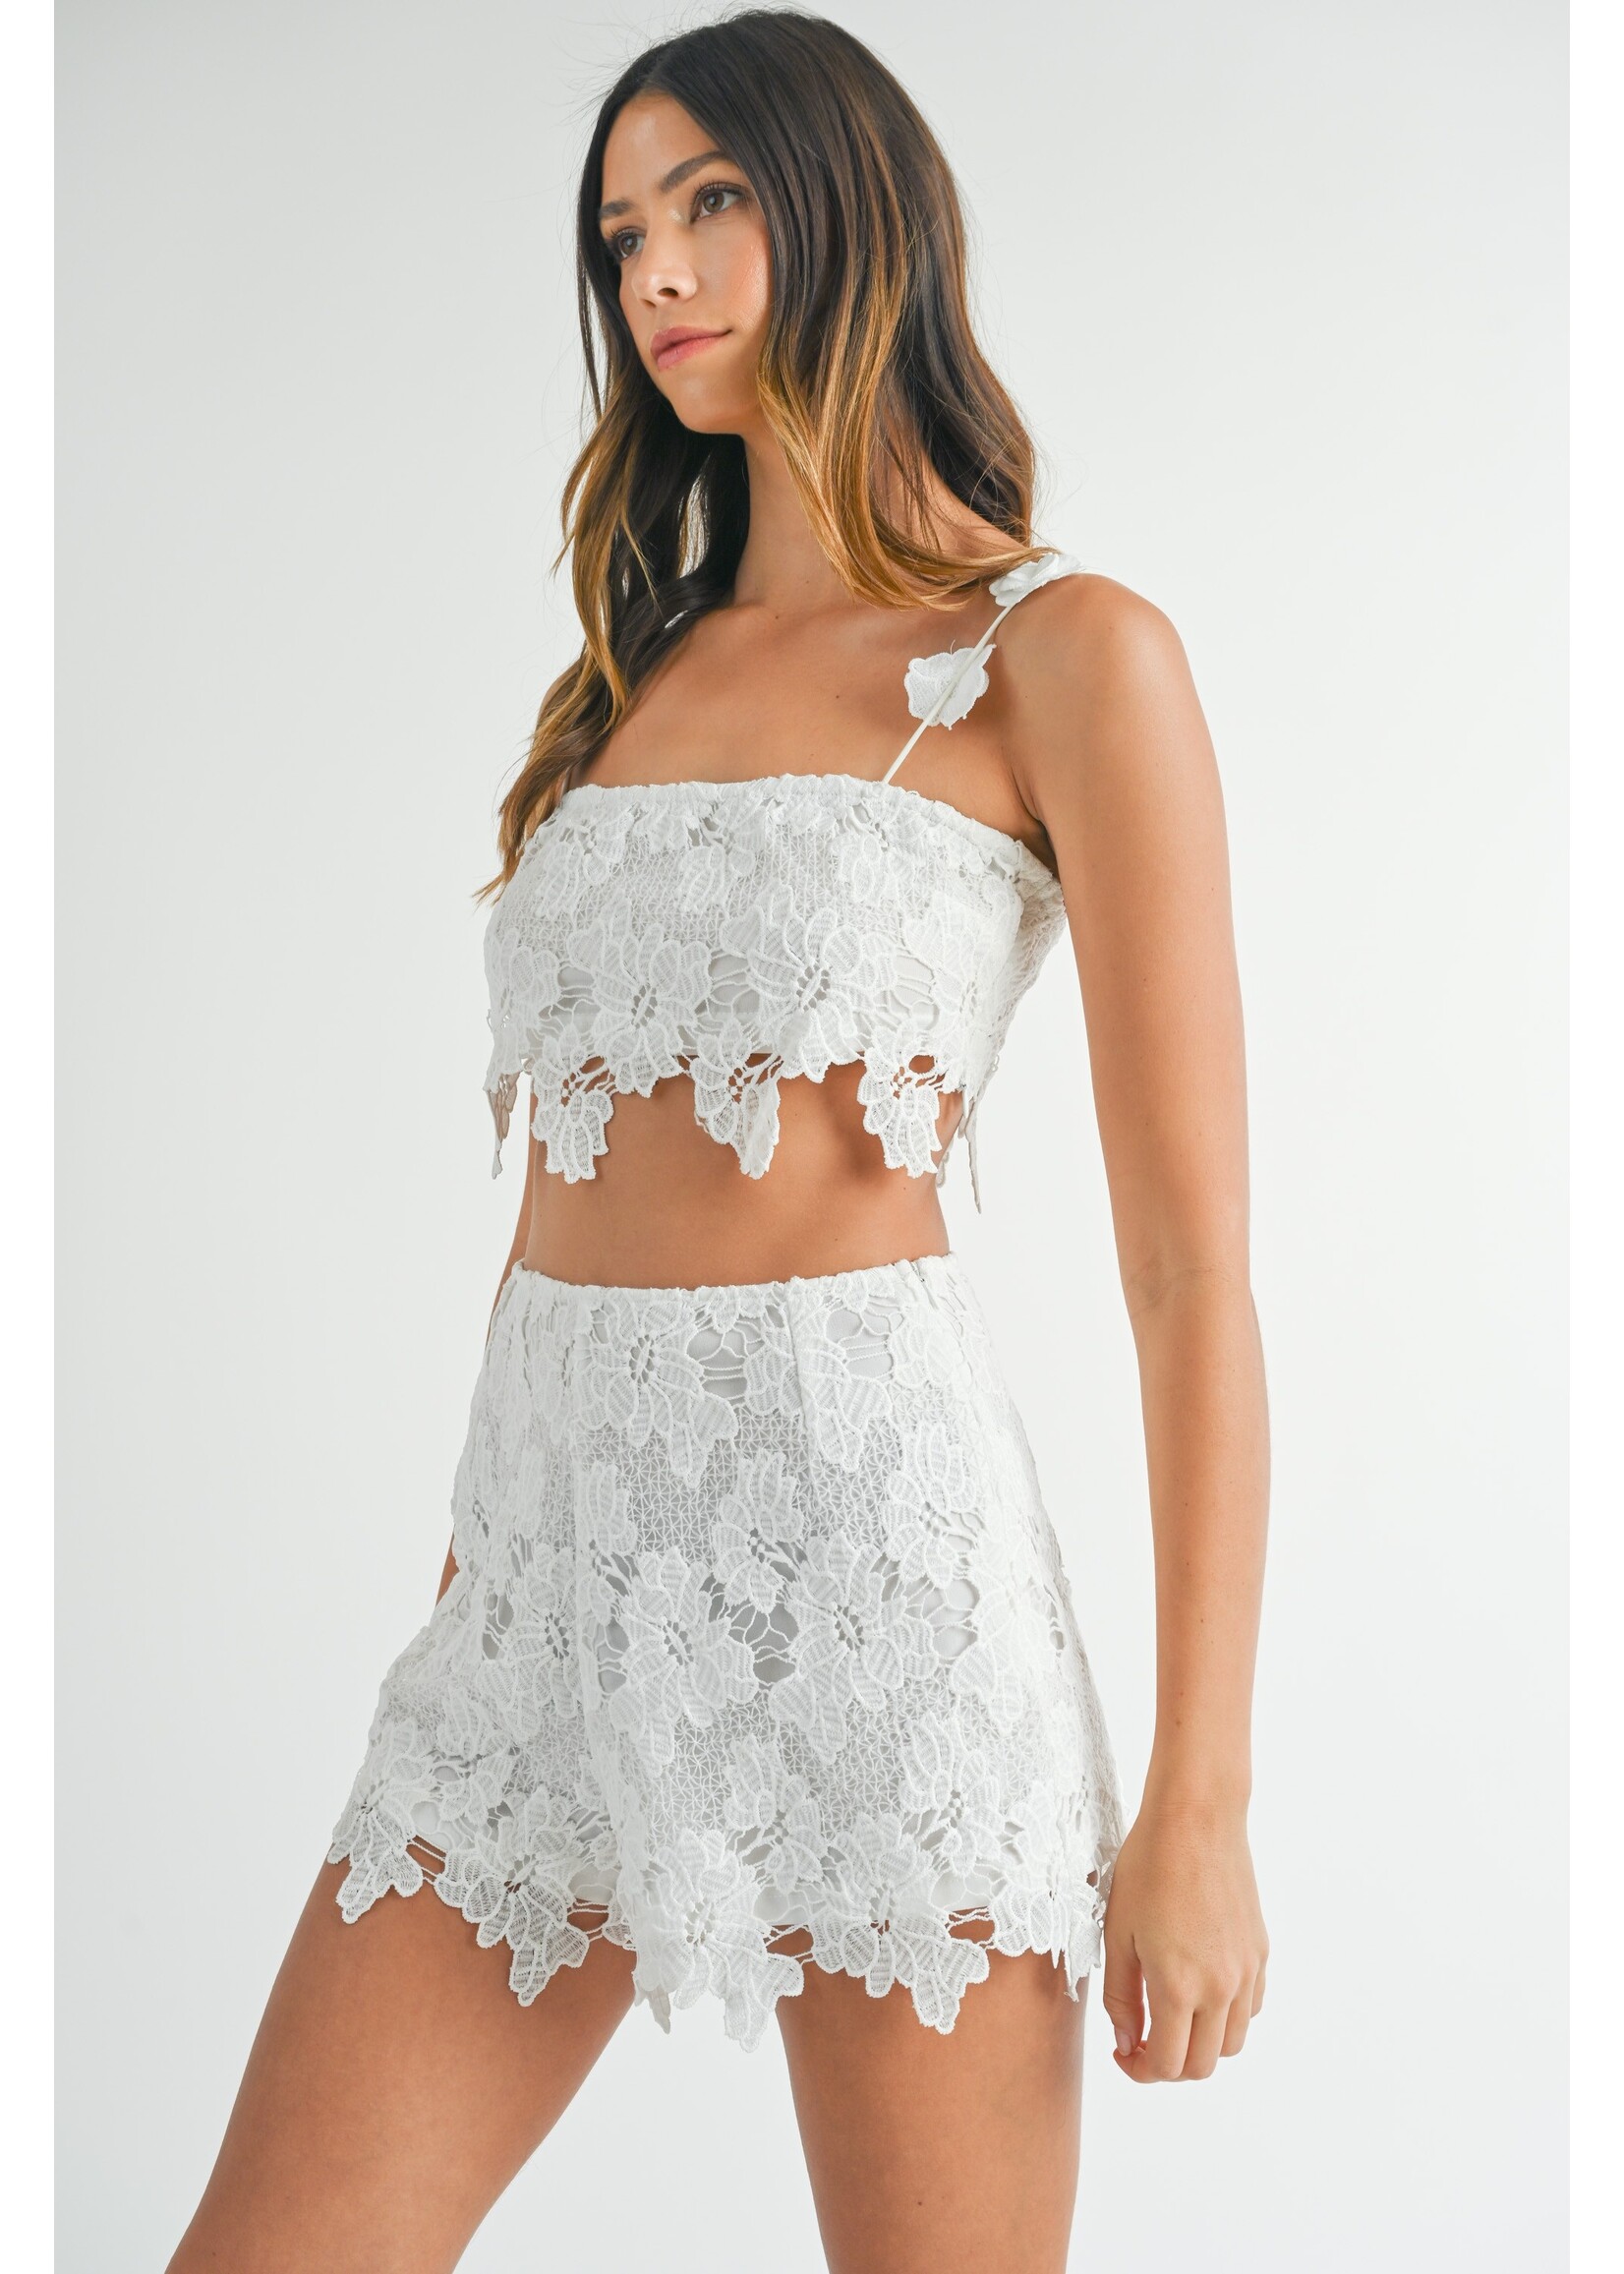 Mable Crochet Lace Crop Top and Shorts Set - MST7840